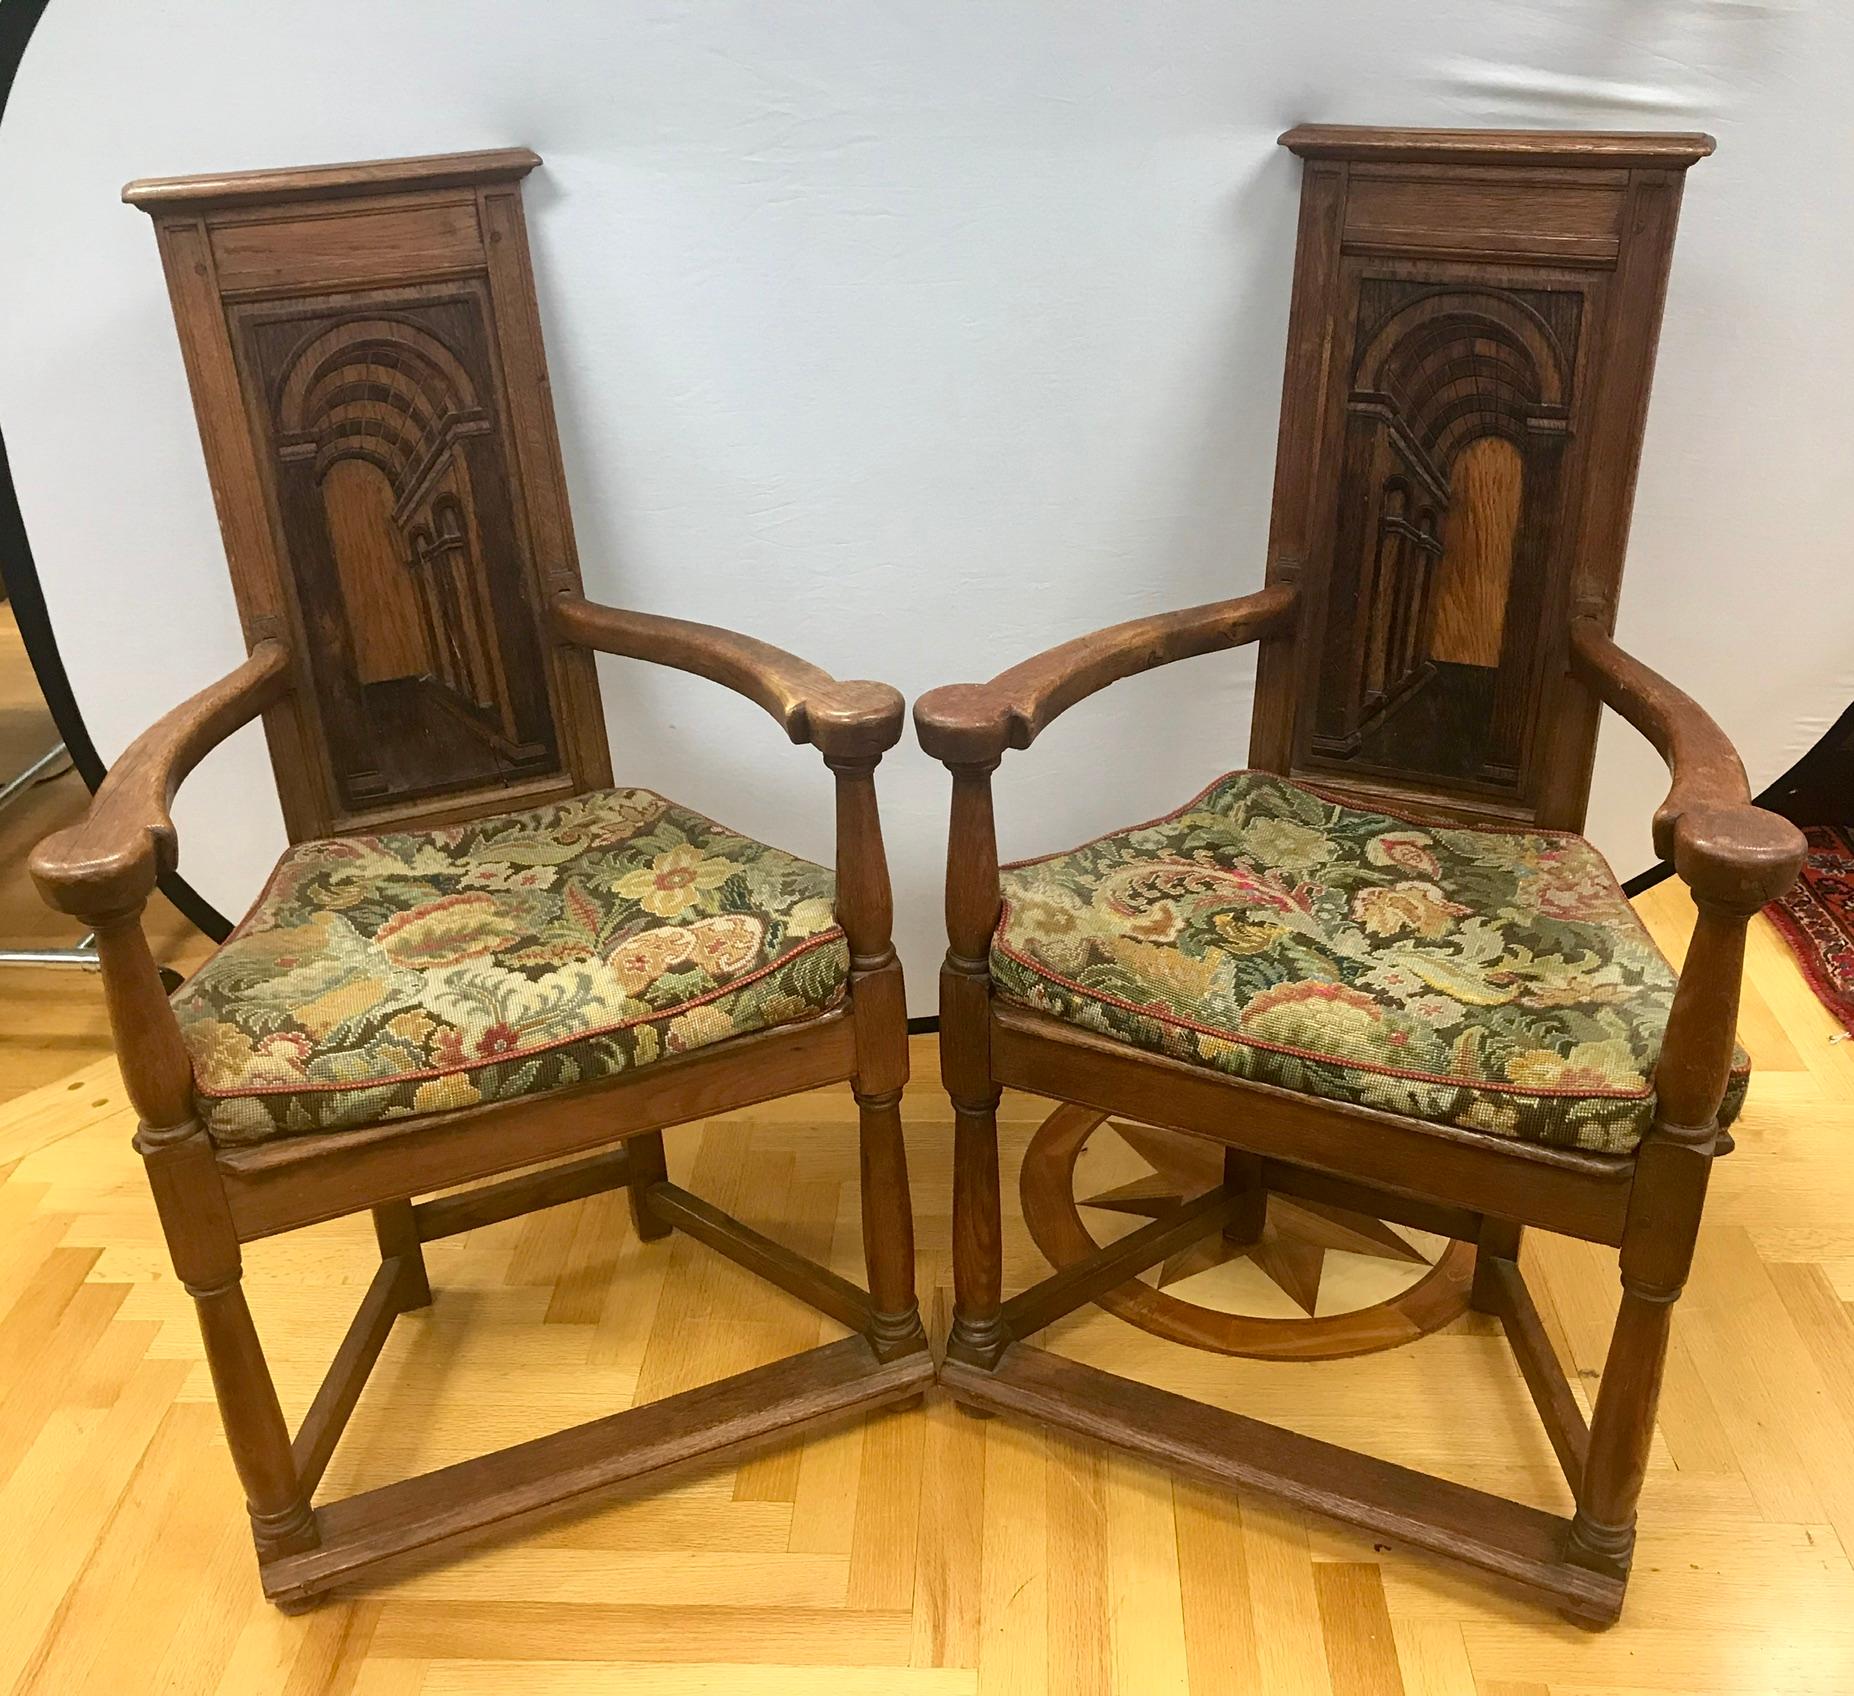 Unusual and elegant antique French Gothic armchairs with original tapestry upholstery.